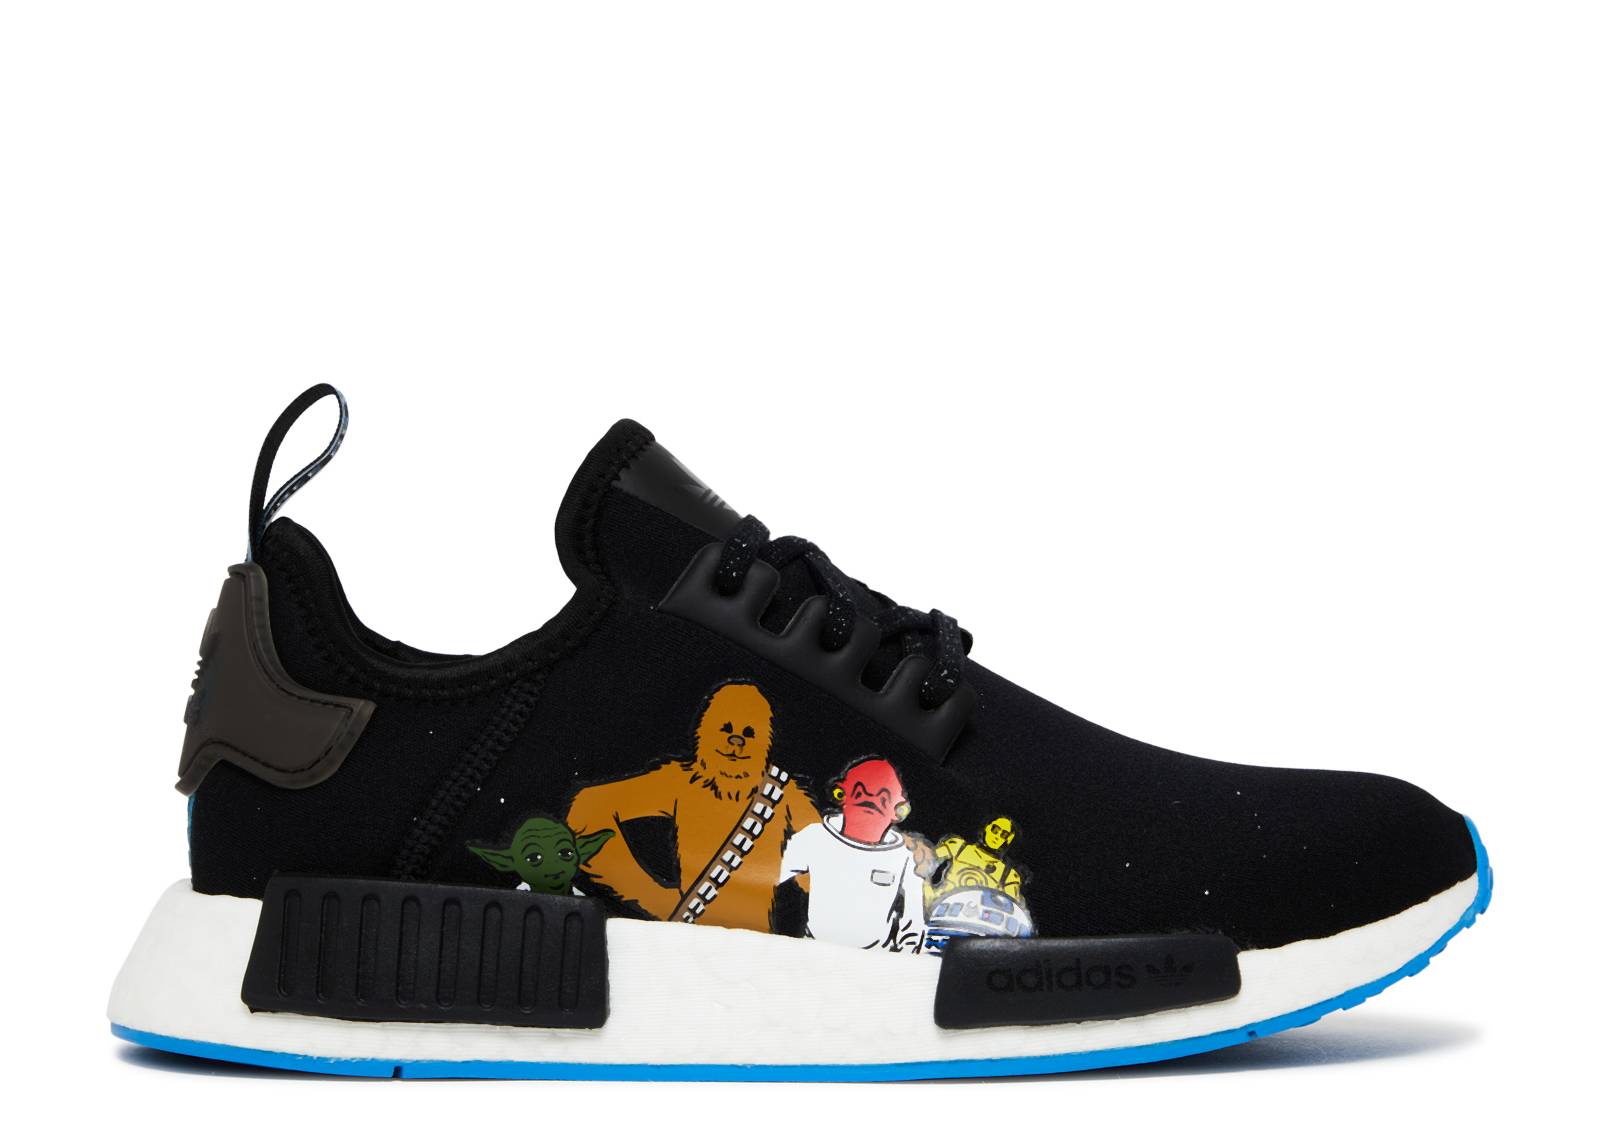 Star Wars x NMD_R1 Big Kid 'Rebels and the First Order'